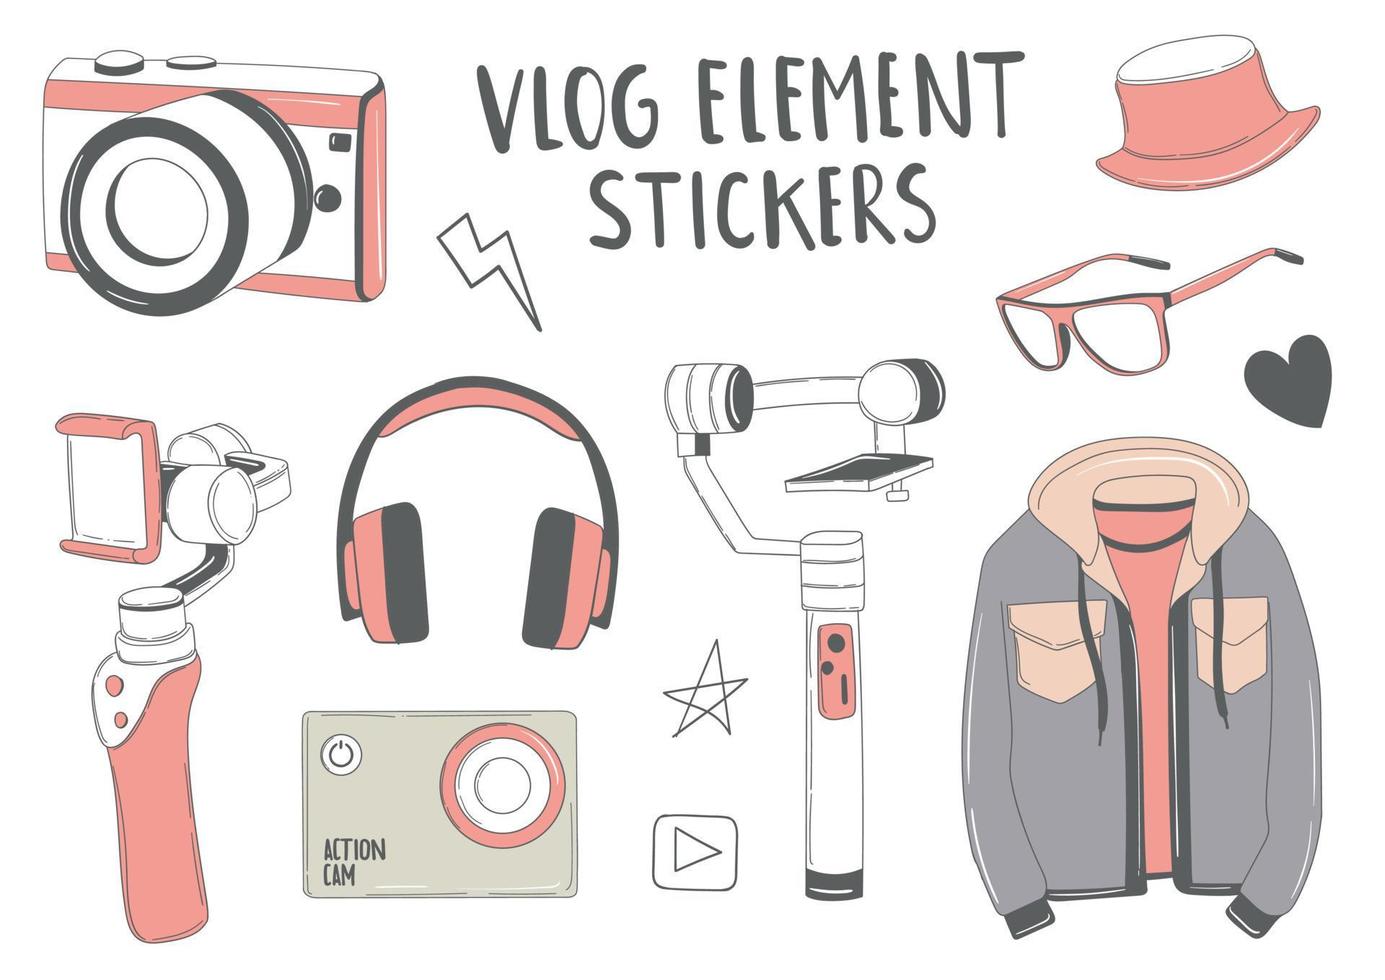 CameraColorful Hand Drawn Vlog Elements Stickers vector